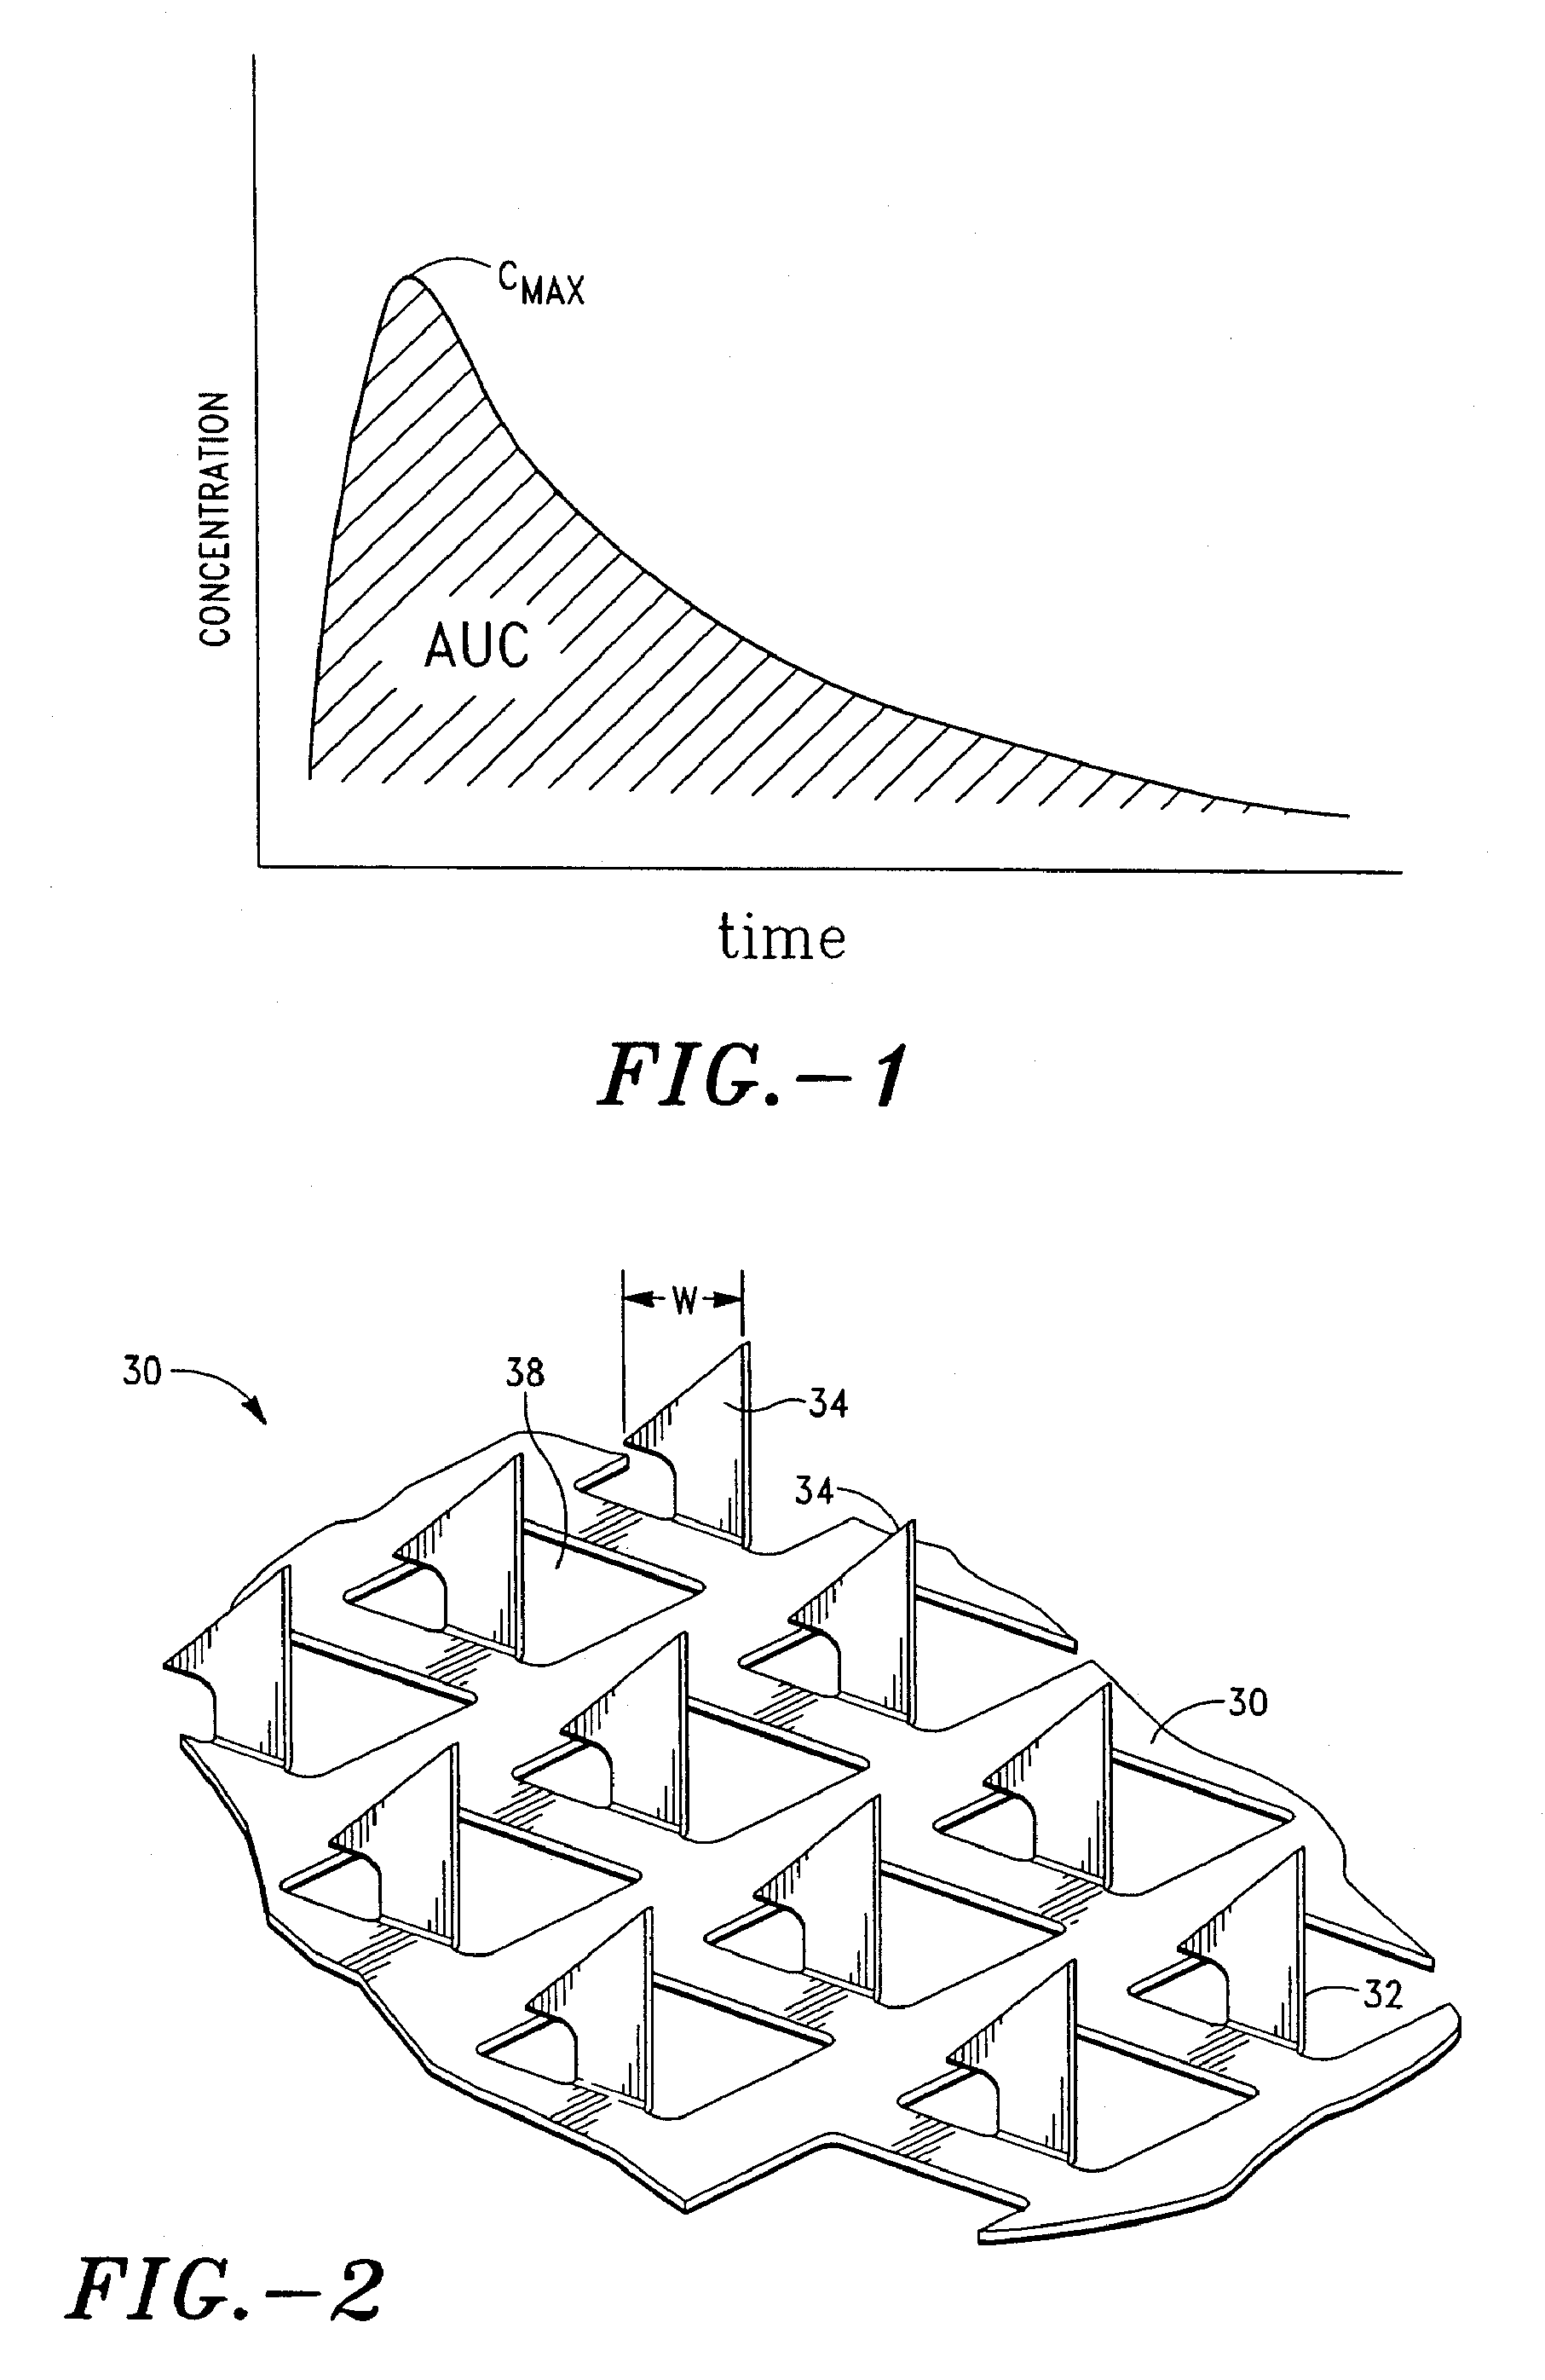 Apparatus and method for transdermal delivery of parathyroid hormone agents